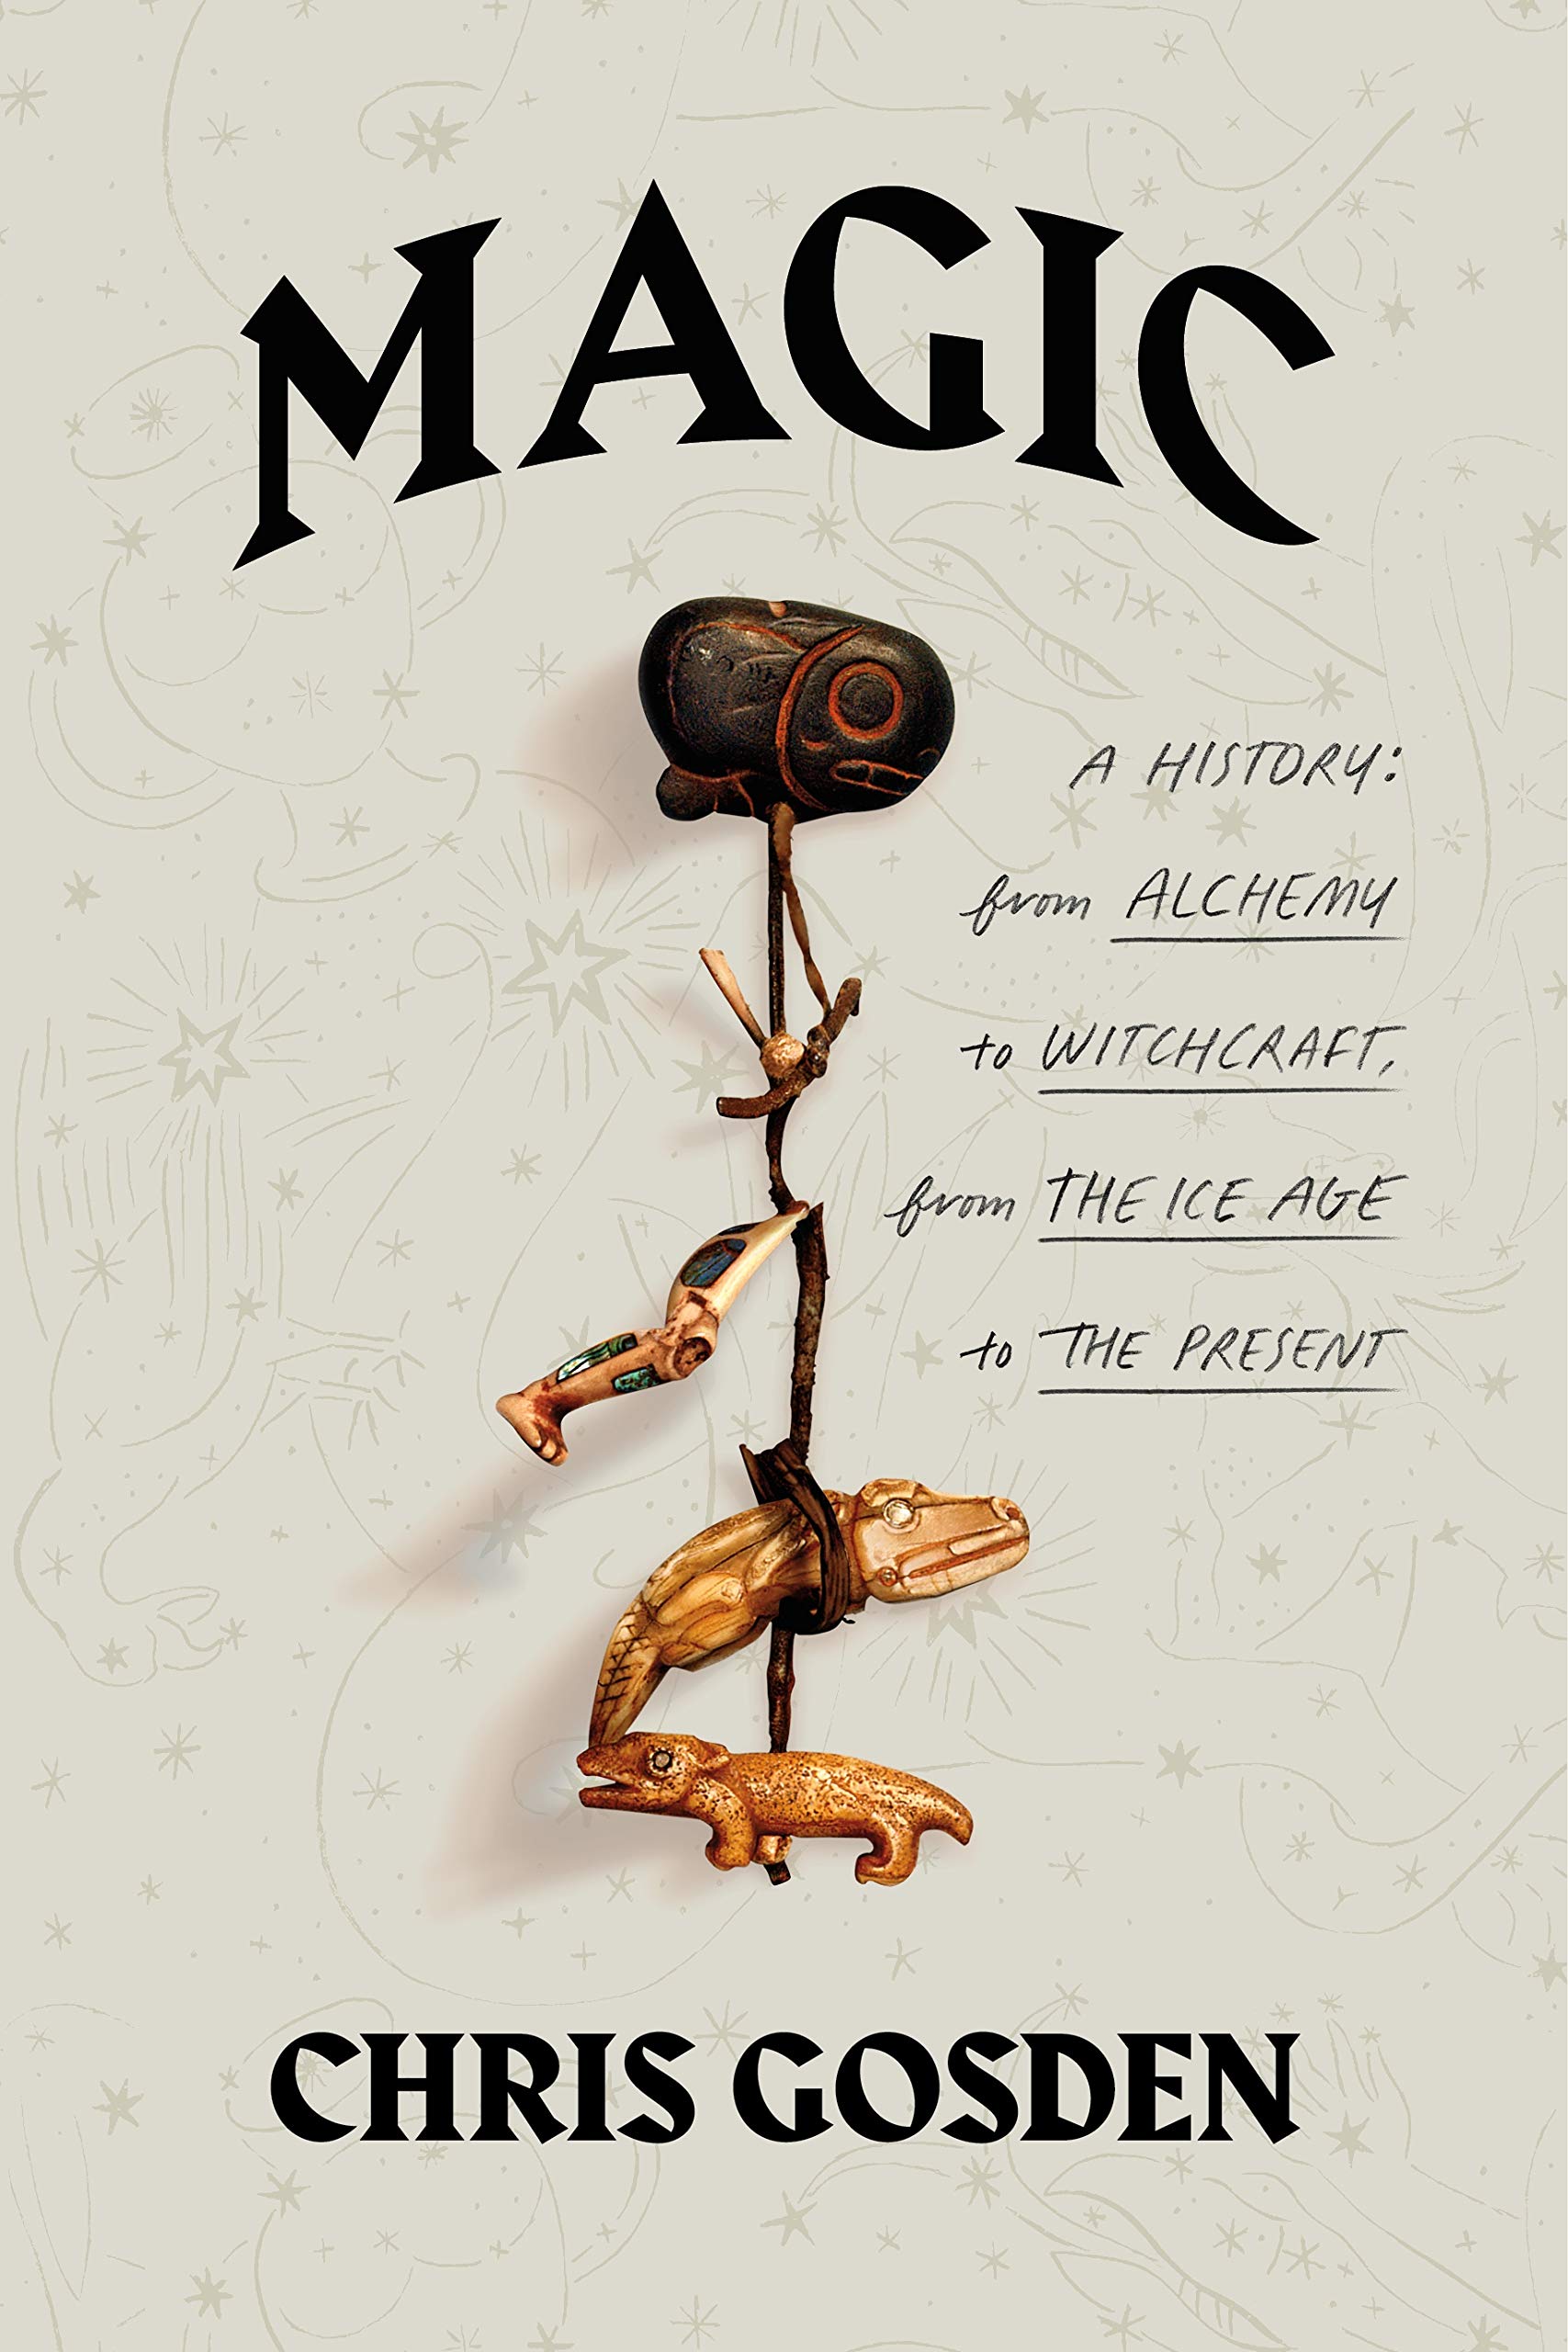 Image for "Magic: A History"